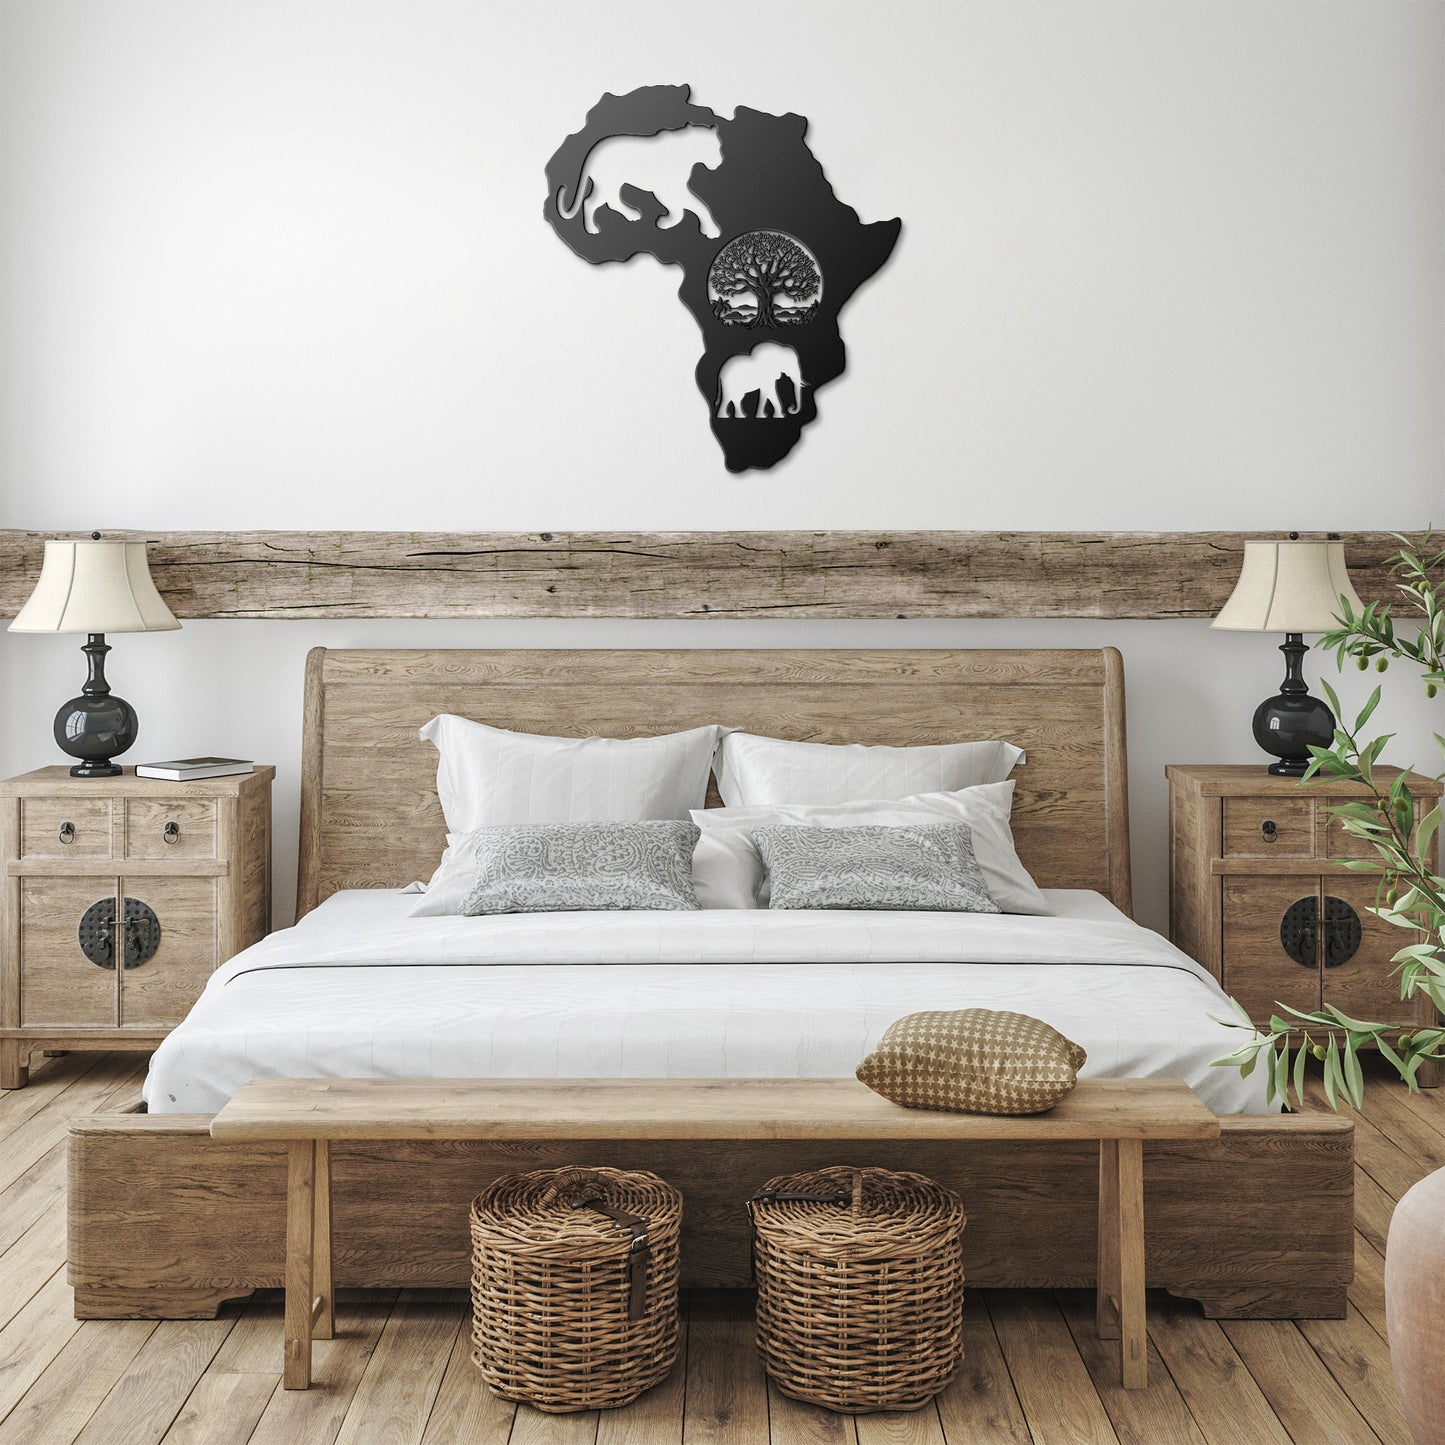 Africa’s Big Five - Die-Cut Metal Wall Art - Leopard and Elephant #17